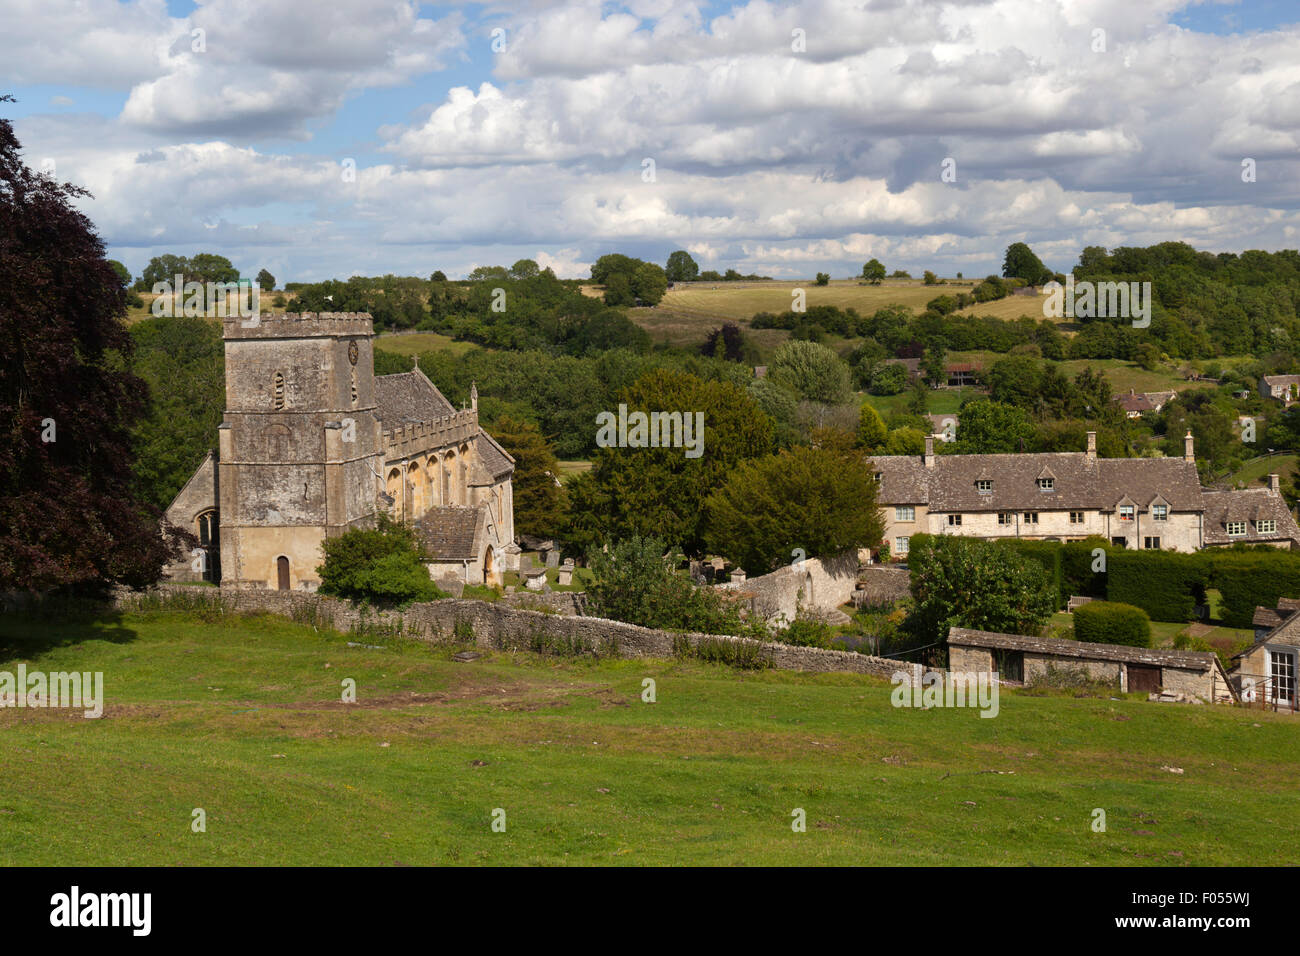 Chedworth, Cotswolds, Gloucestershire, England, Regno Unito, Europa Foto Stock